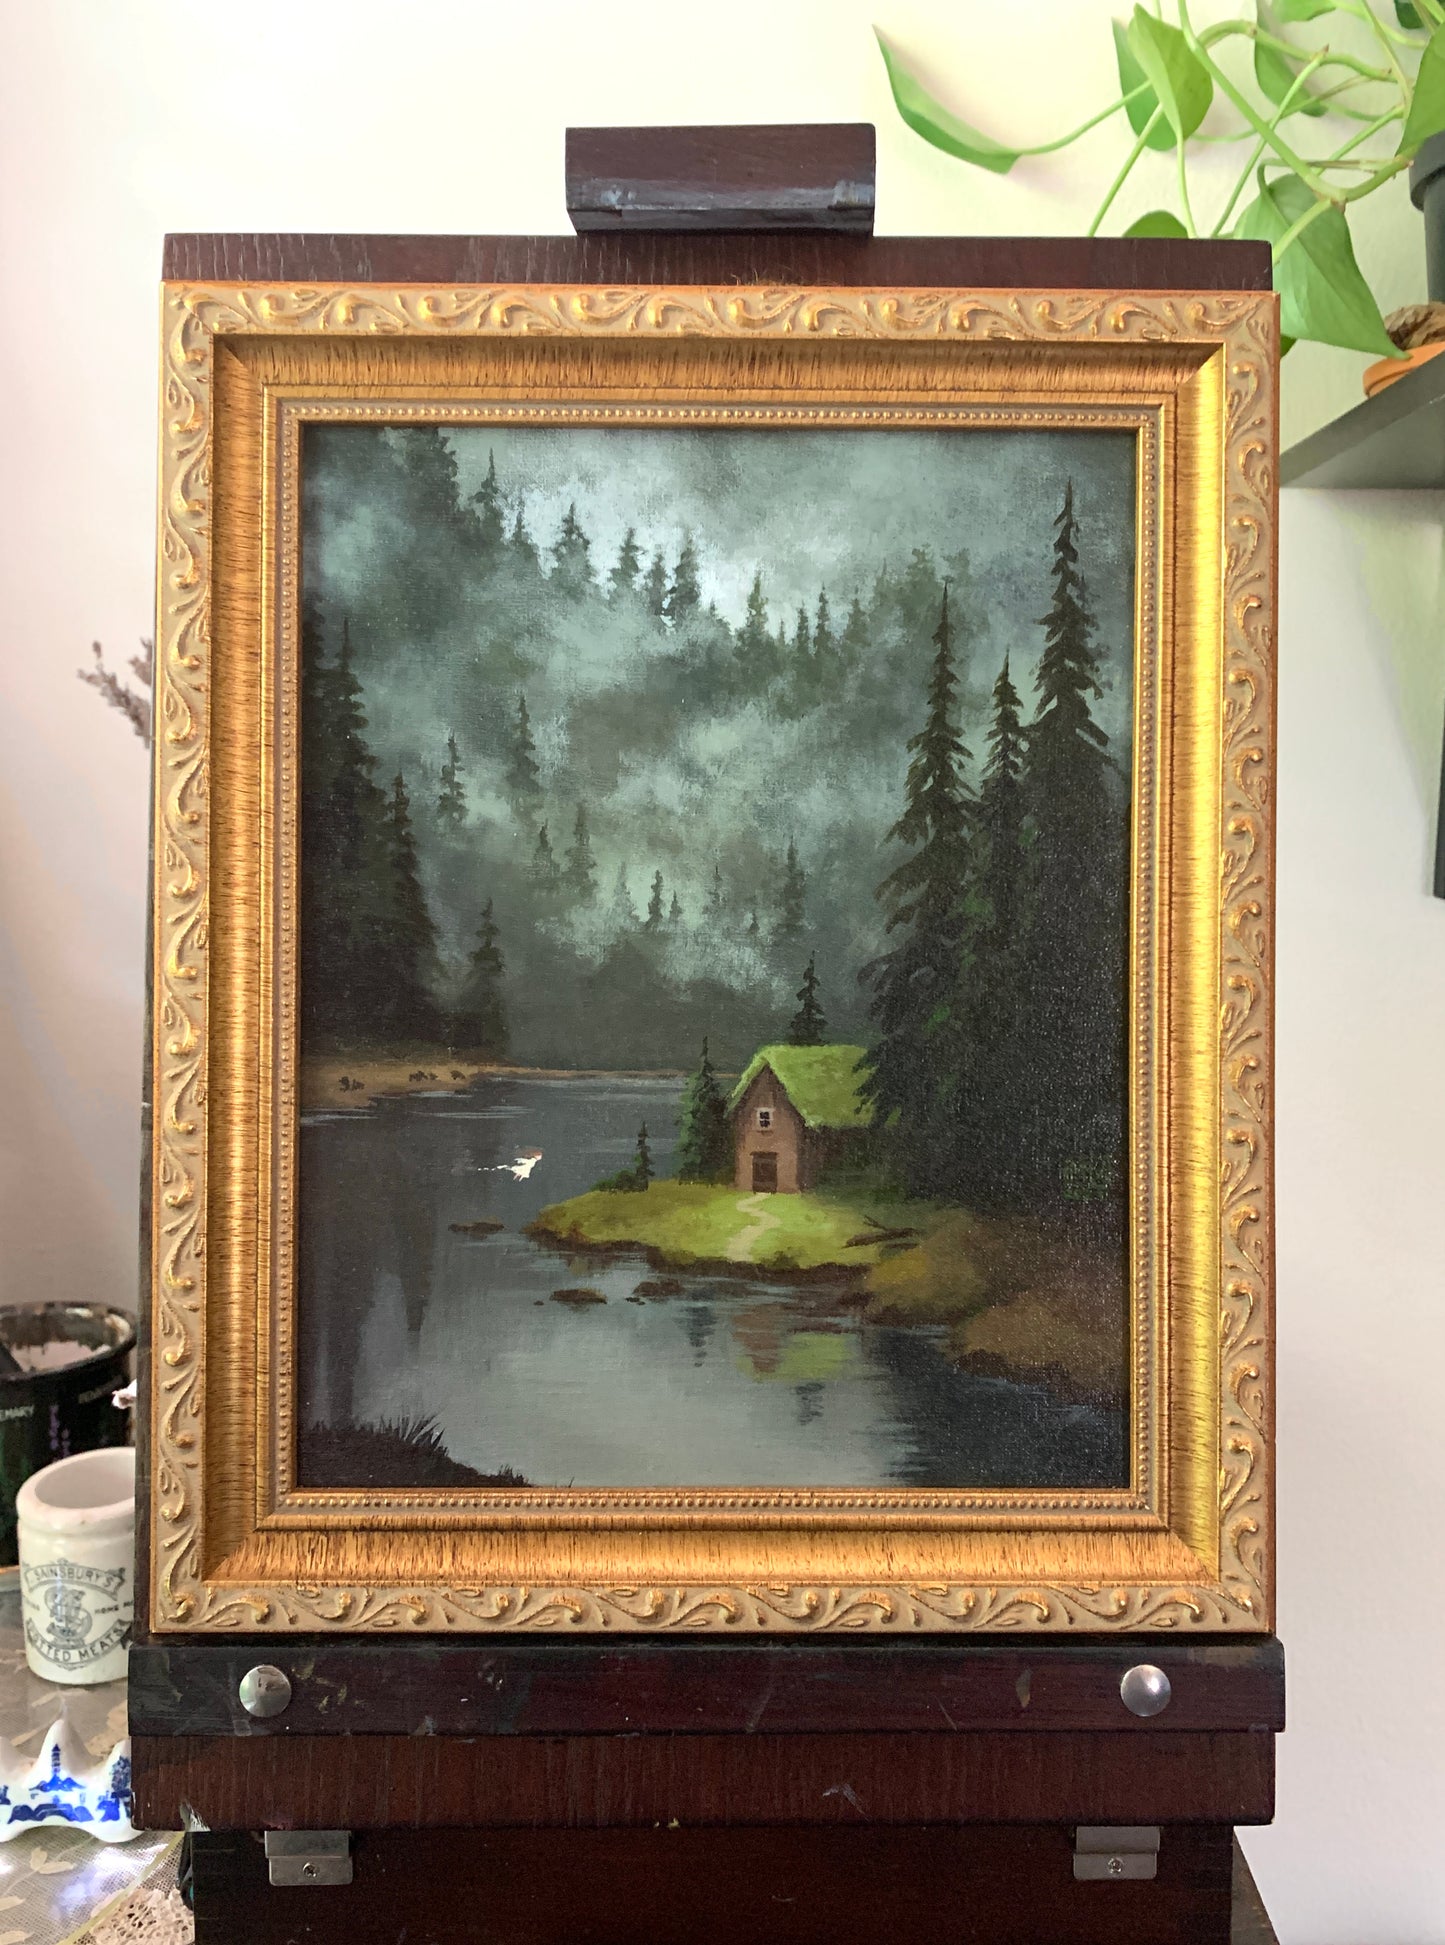 Original painting - "Home" 8x10 forest cottage art